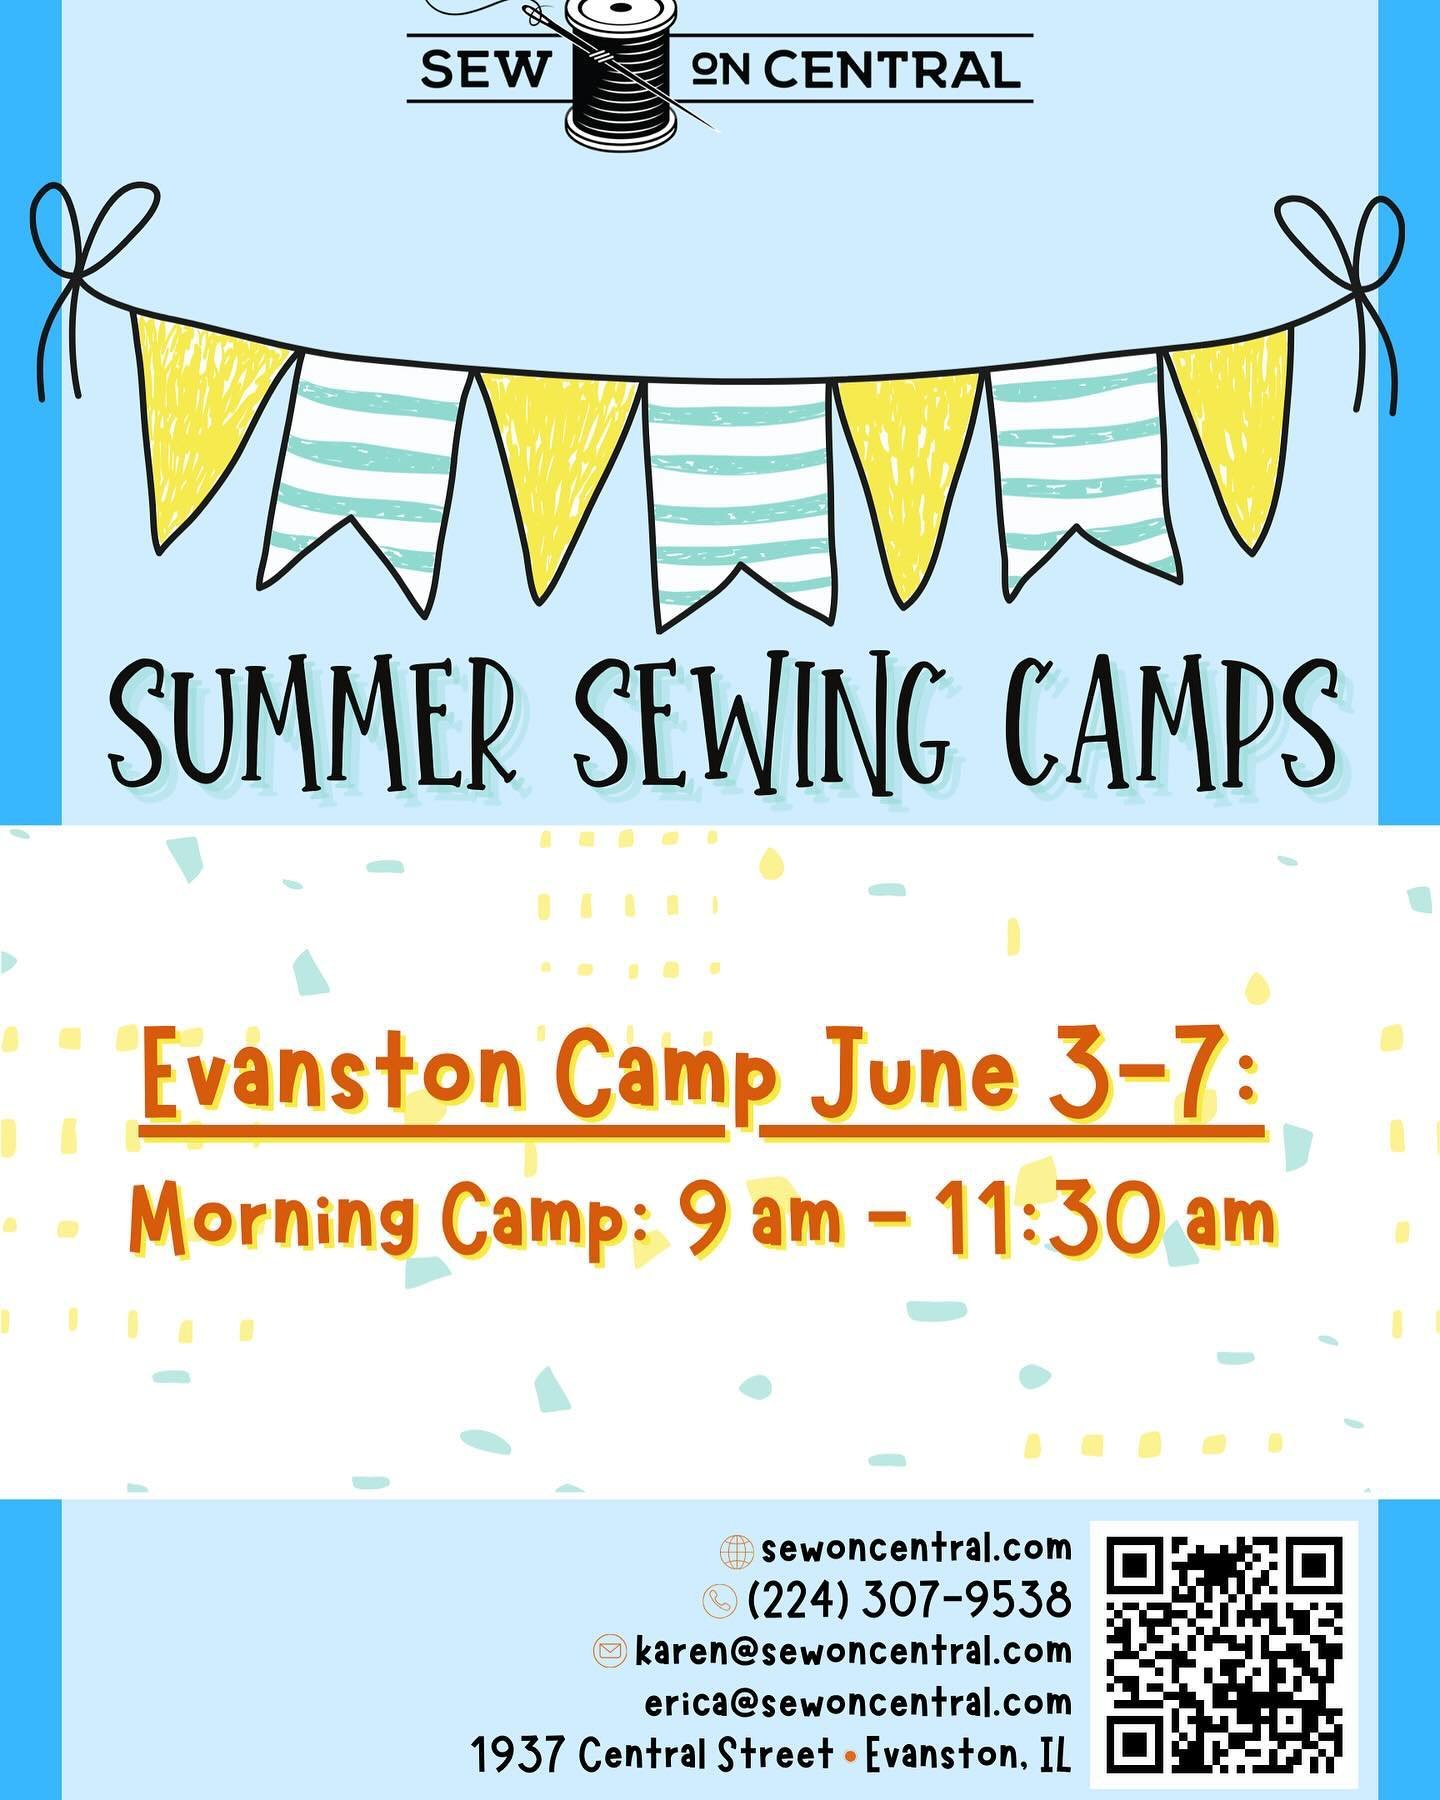 Attention Evanston families, looking for activities for your kids the first week of June? Look no further 💕☀️🪡🧵we have a special summer camp June 3-7! There are a few spots left, join us for a week of sewing adventures! 

#sewingcamps 
#evanston
#